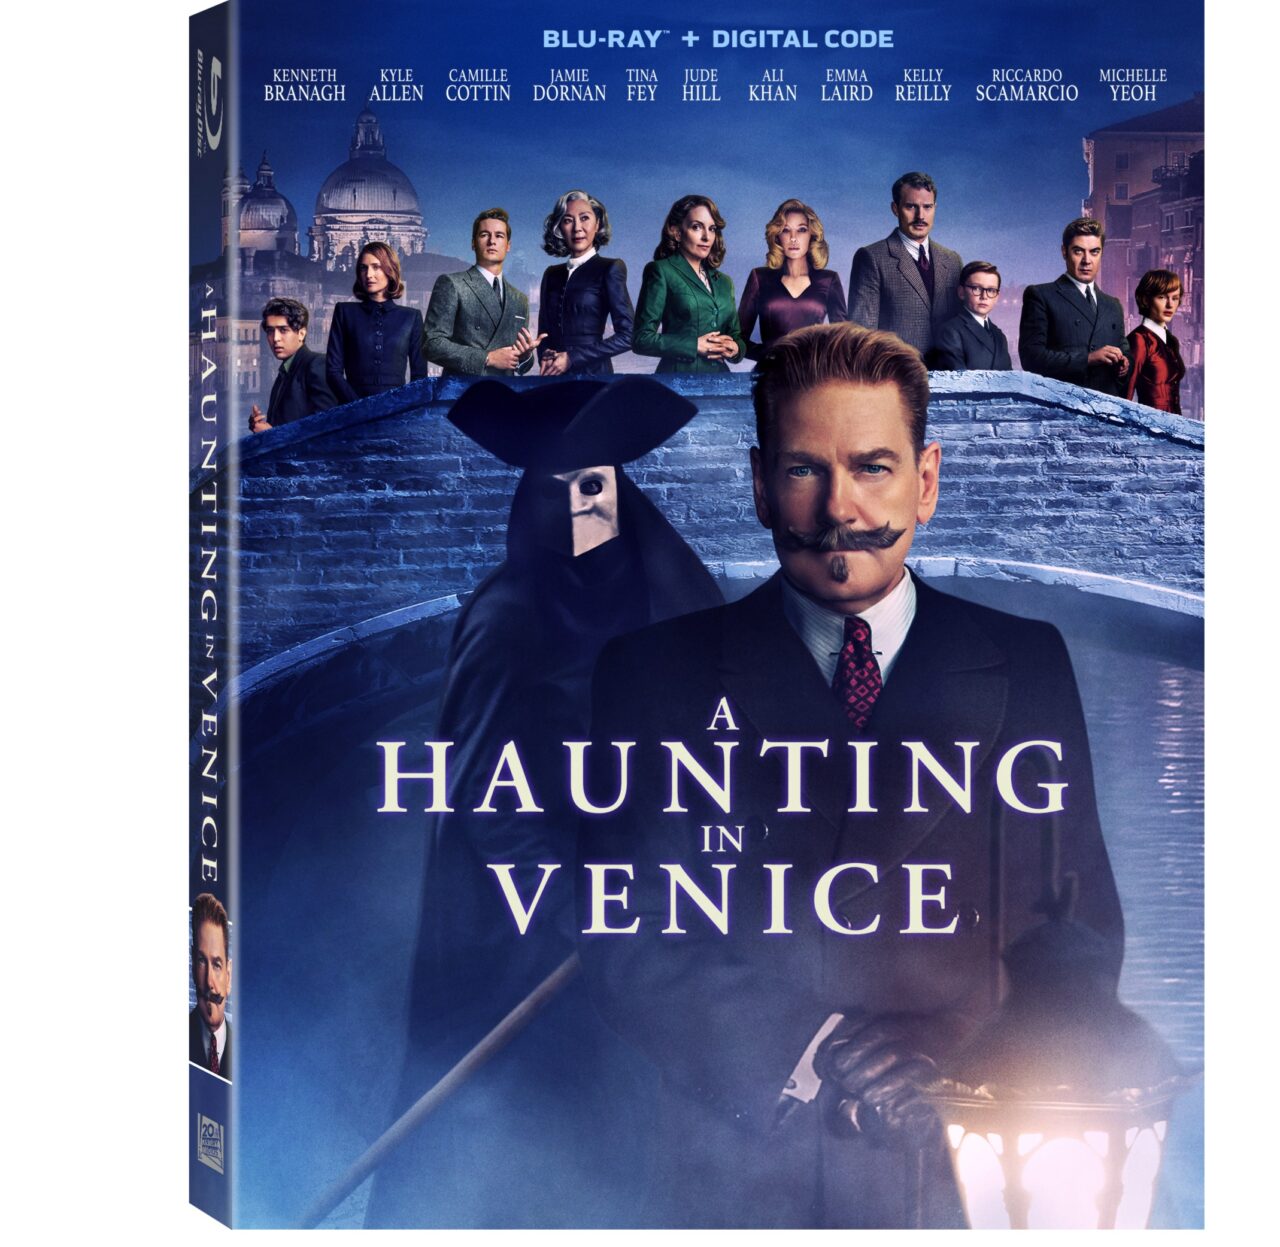 A Haunting In Venice Blu-Ray Combo Pack cover (20th Century Studios)